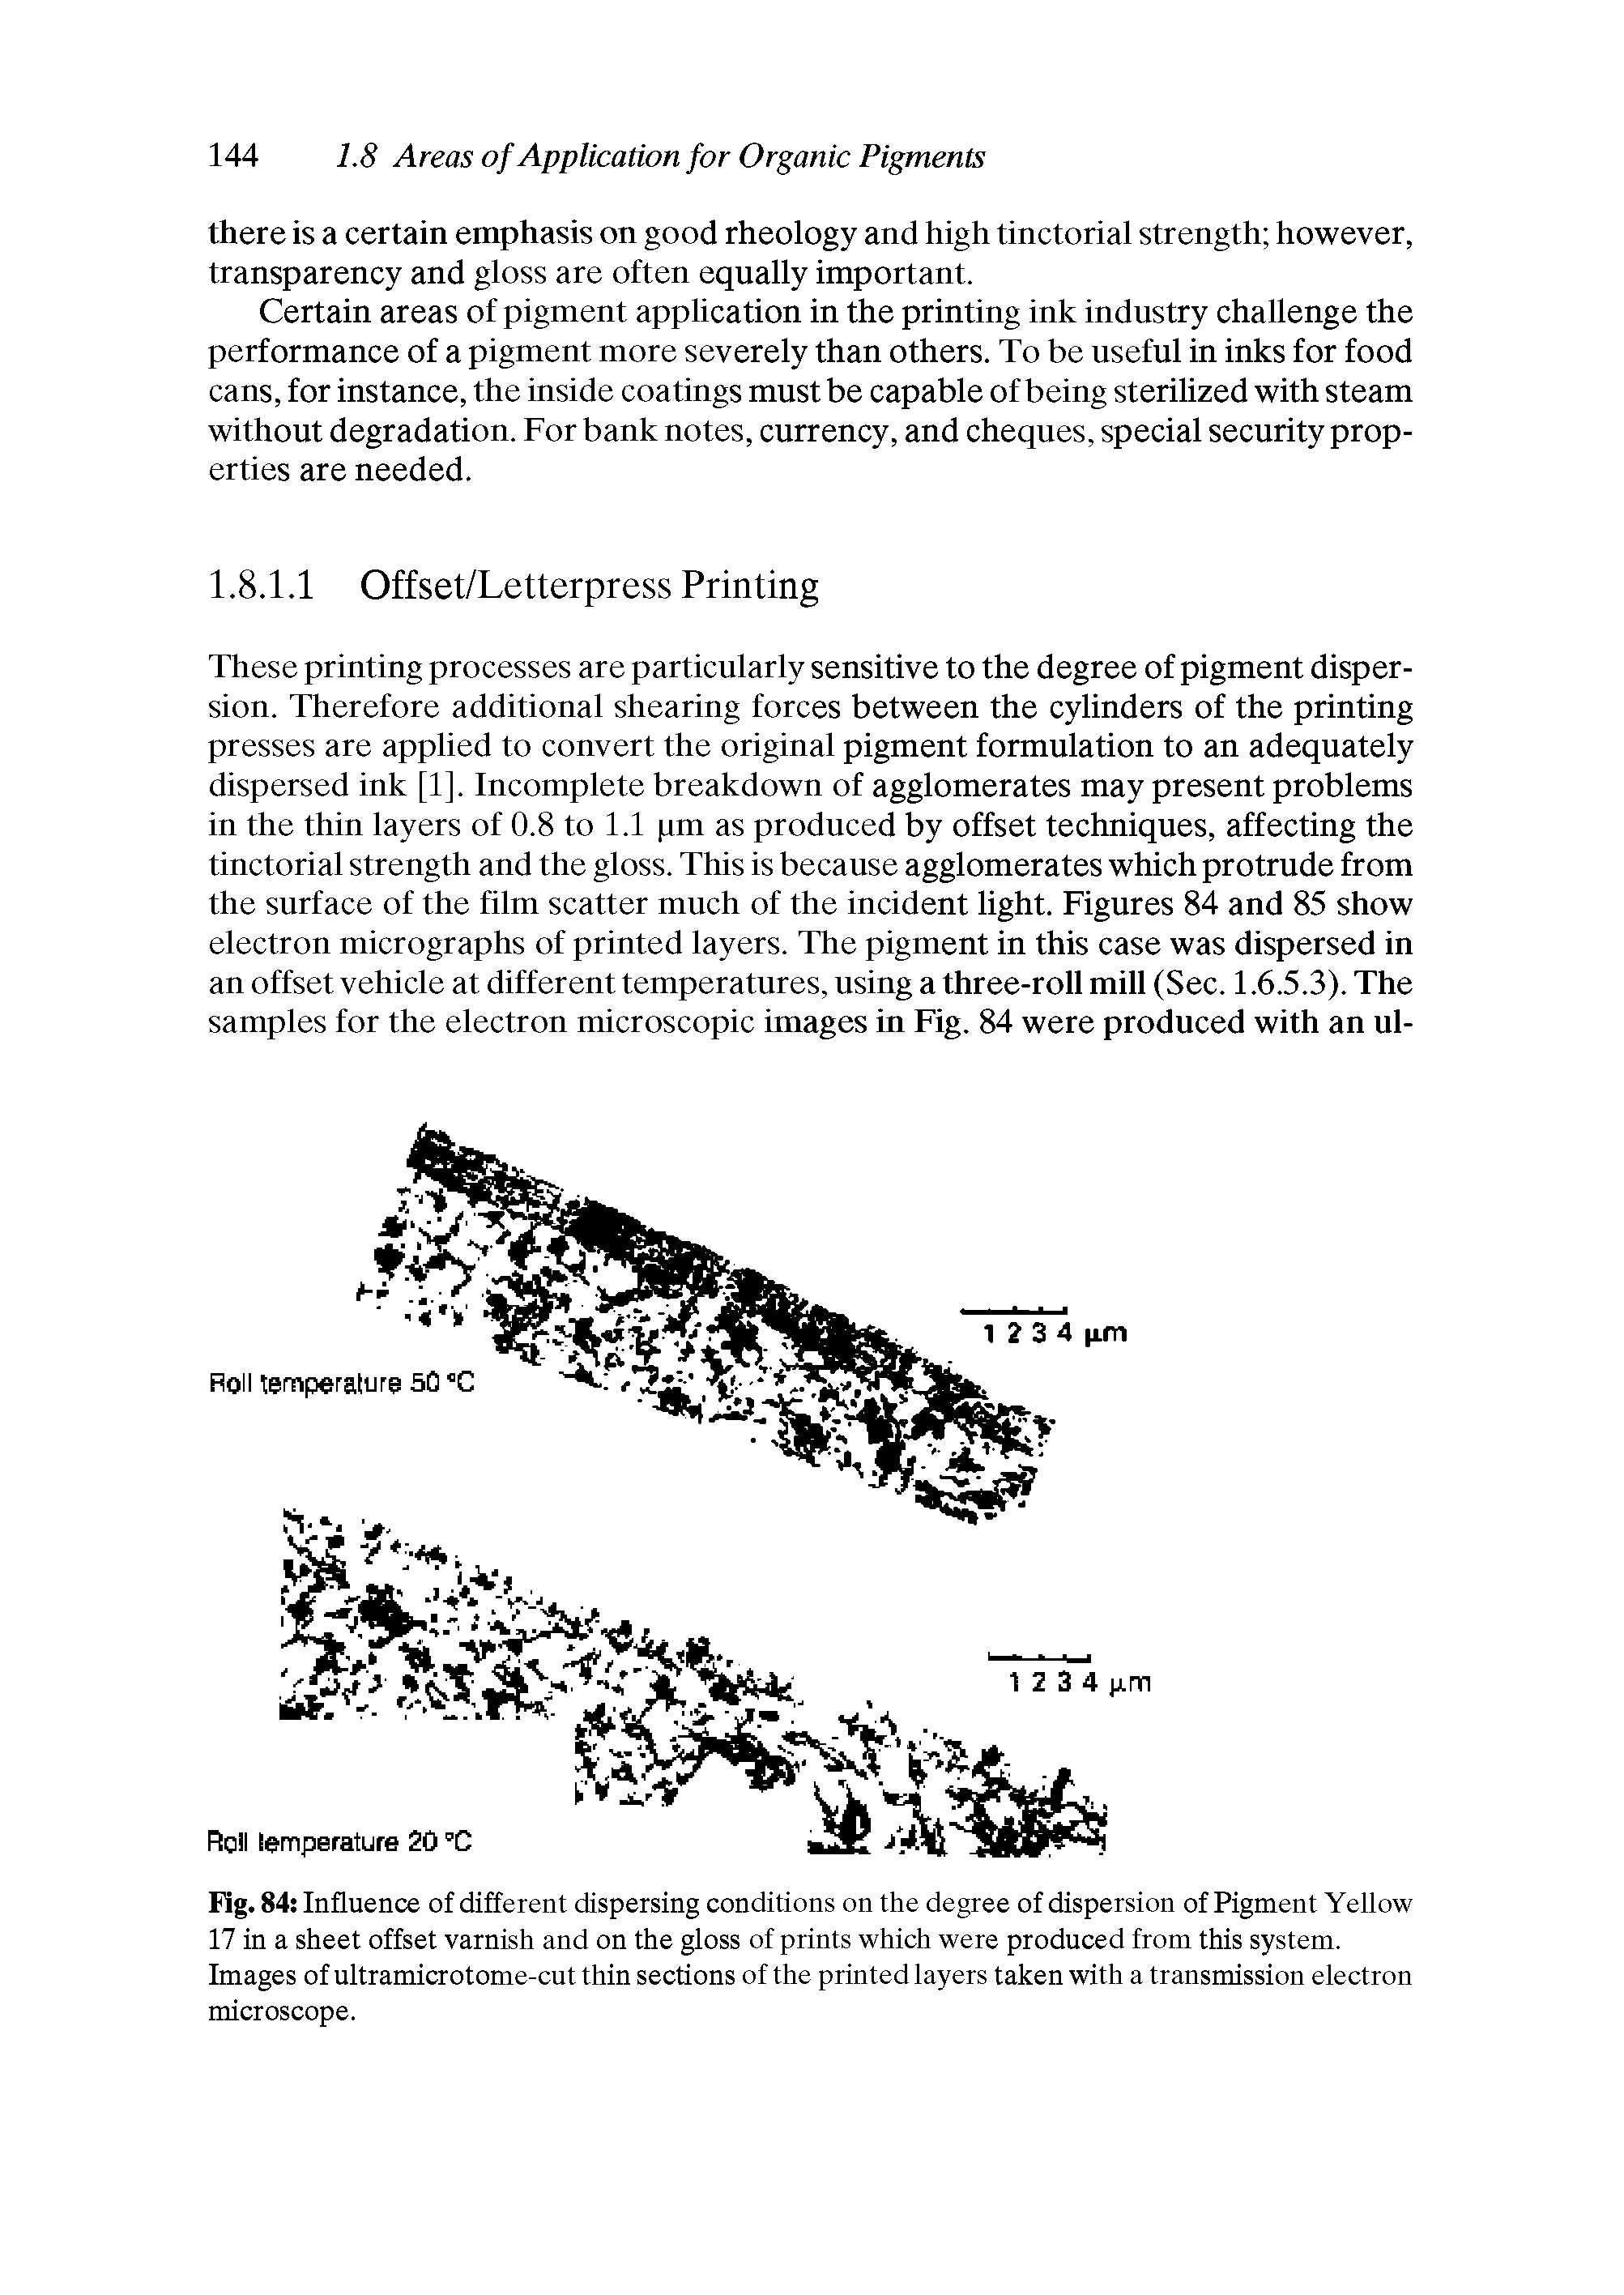 Fig.84 Influence of different dispersing conditions on the degree of dispersion of Pigment Yellow 17 in a sheet offset varnish and on the gloss of prints which were produced from this system. Images of ultramicrotome-cut thin sections of the printed layers taken with a transmission electron microscope.